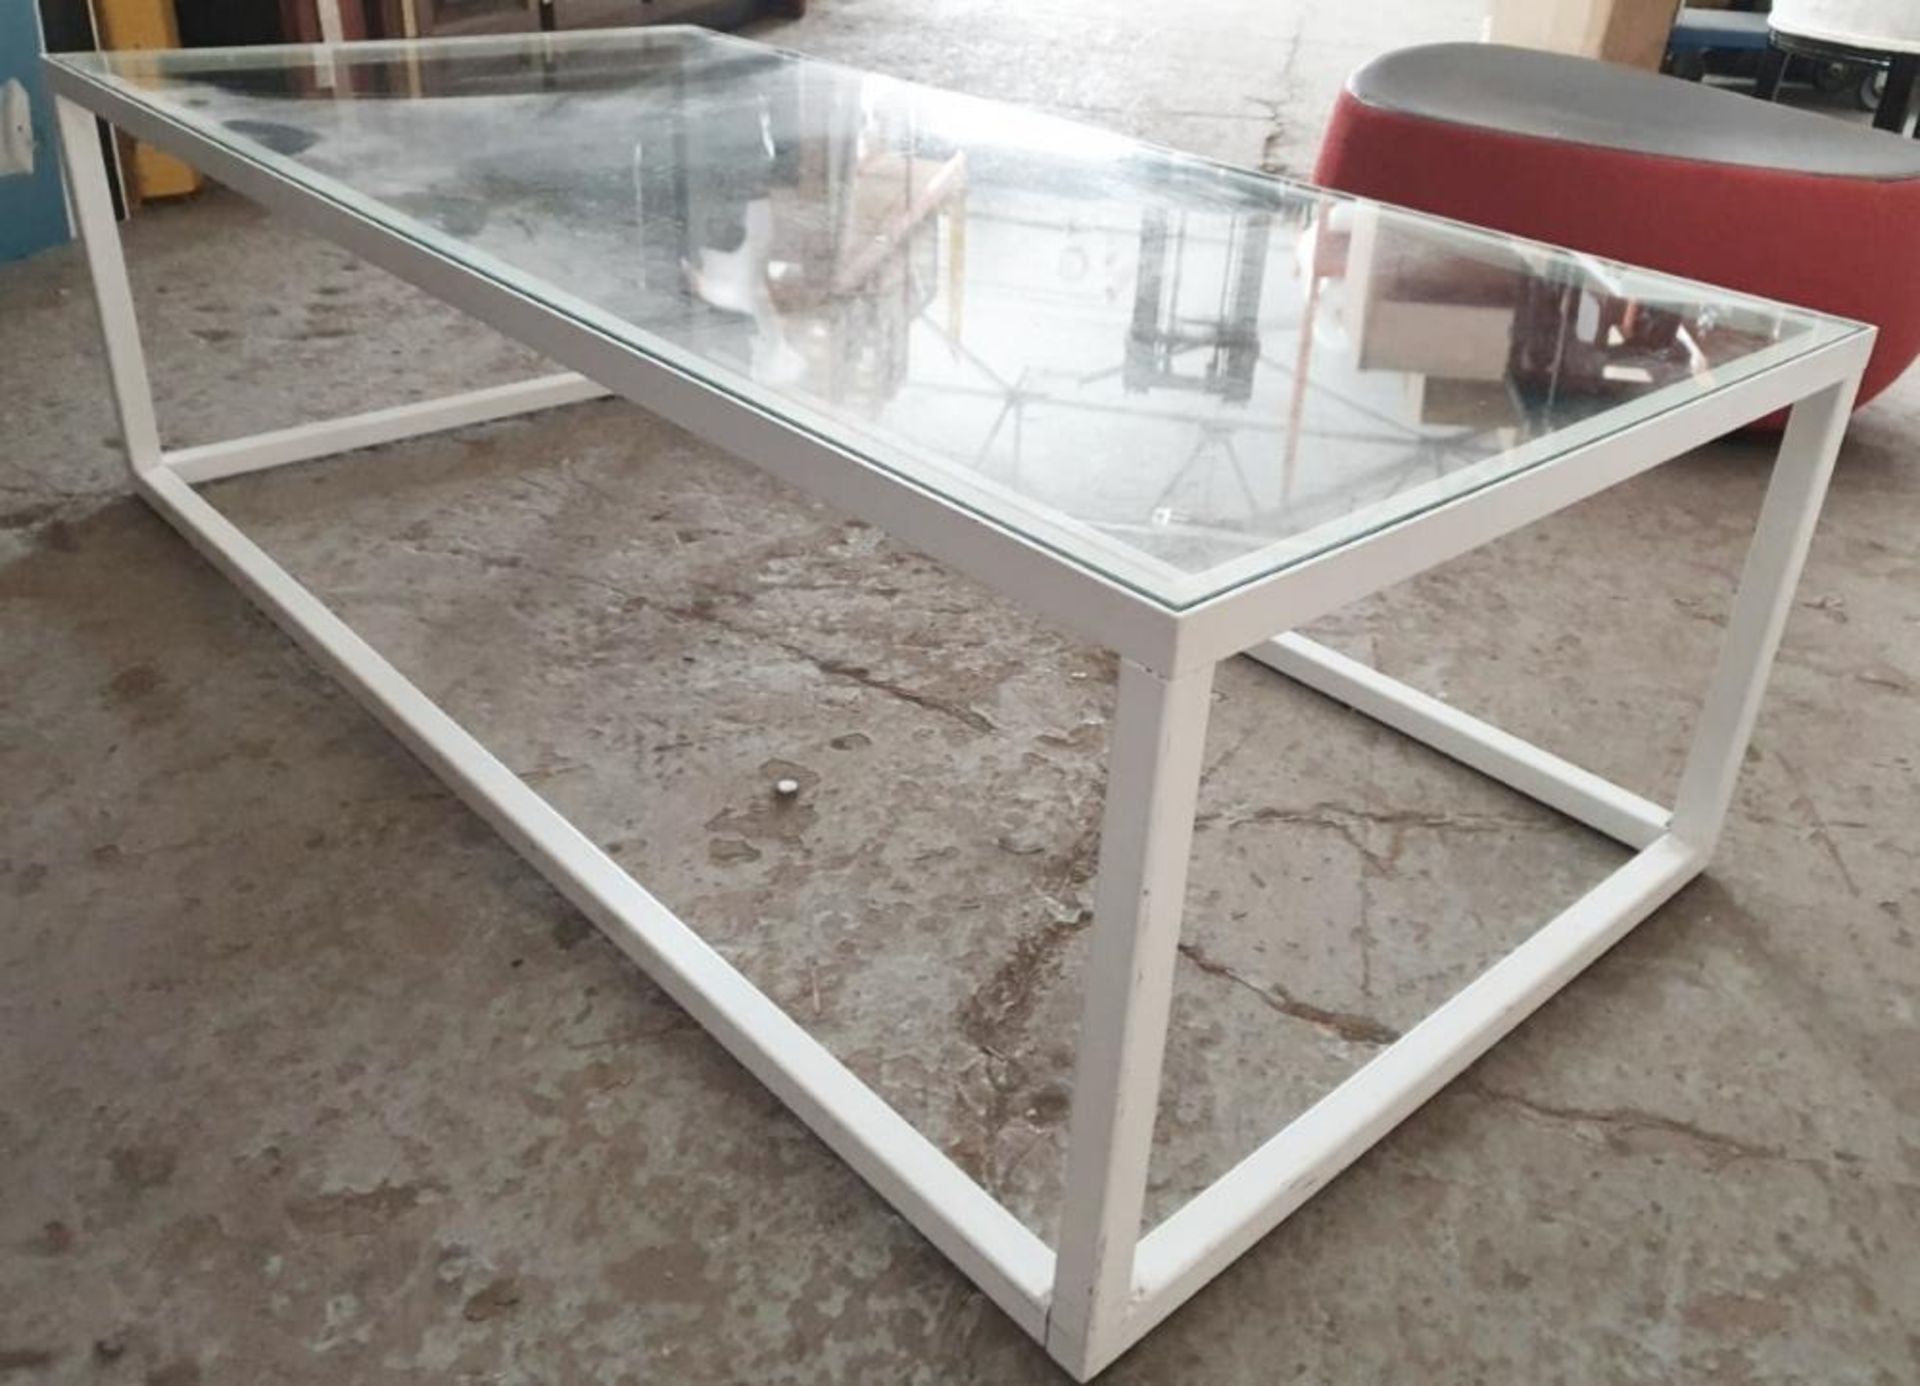 1 x Rectangular Glass-Topped Coffee Table - Pre-owned Item - £1 Start, No Reserve - Image 3 of 4